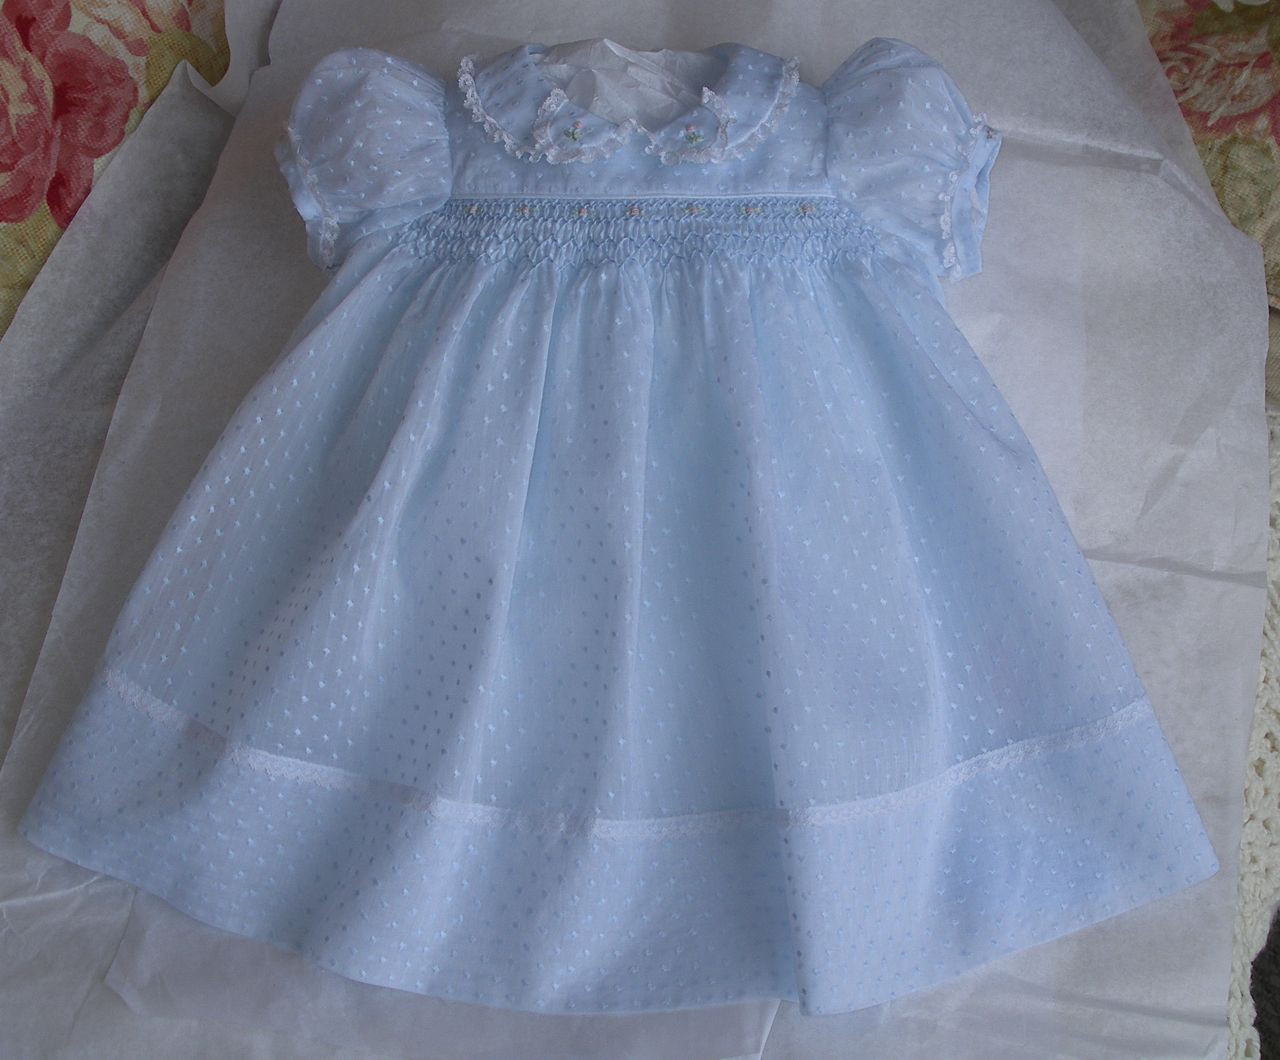 Baby Fashion Dress
 The Old Fashioned Baby Sewing Room Blue